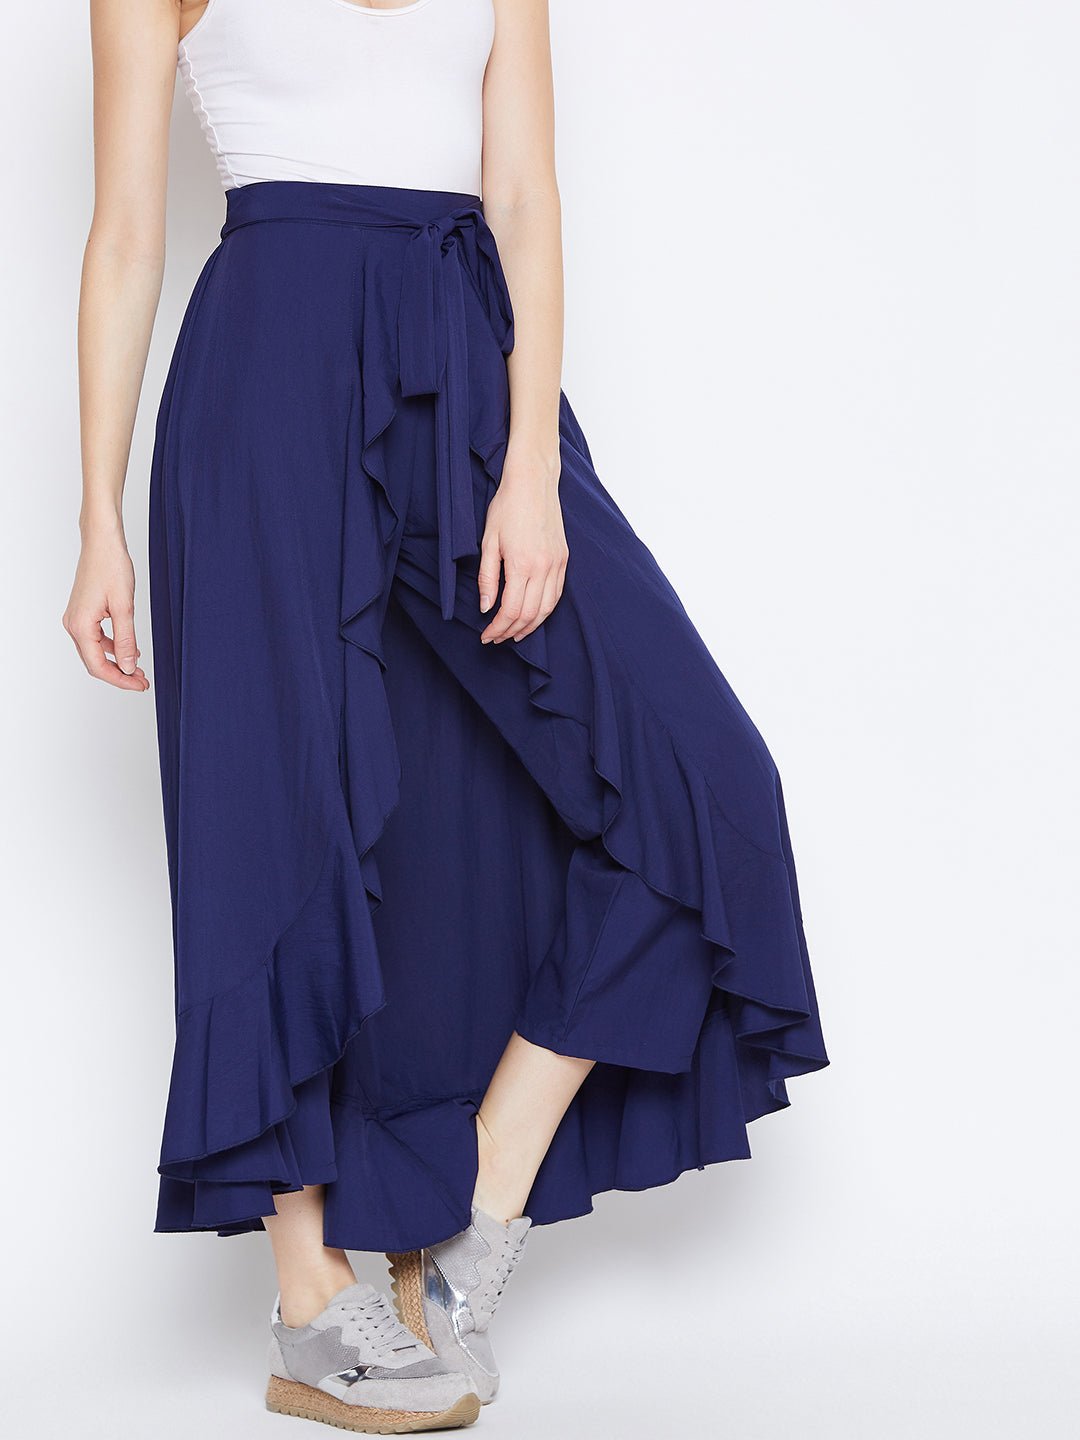 Folk Republic Women Solid Navy Blue Waist Tie-Up High-Low Flared Maxi Skirt with Attached Trousers - #folk republic#